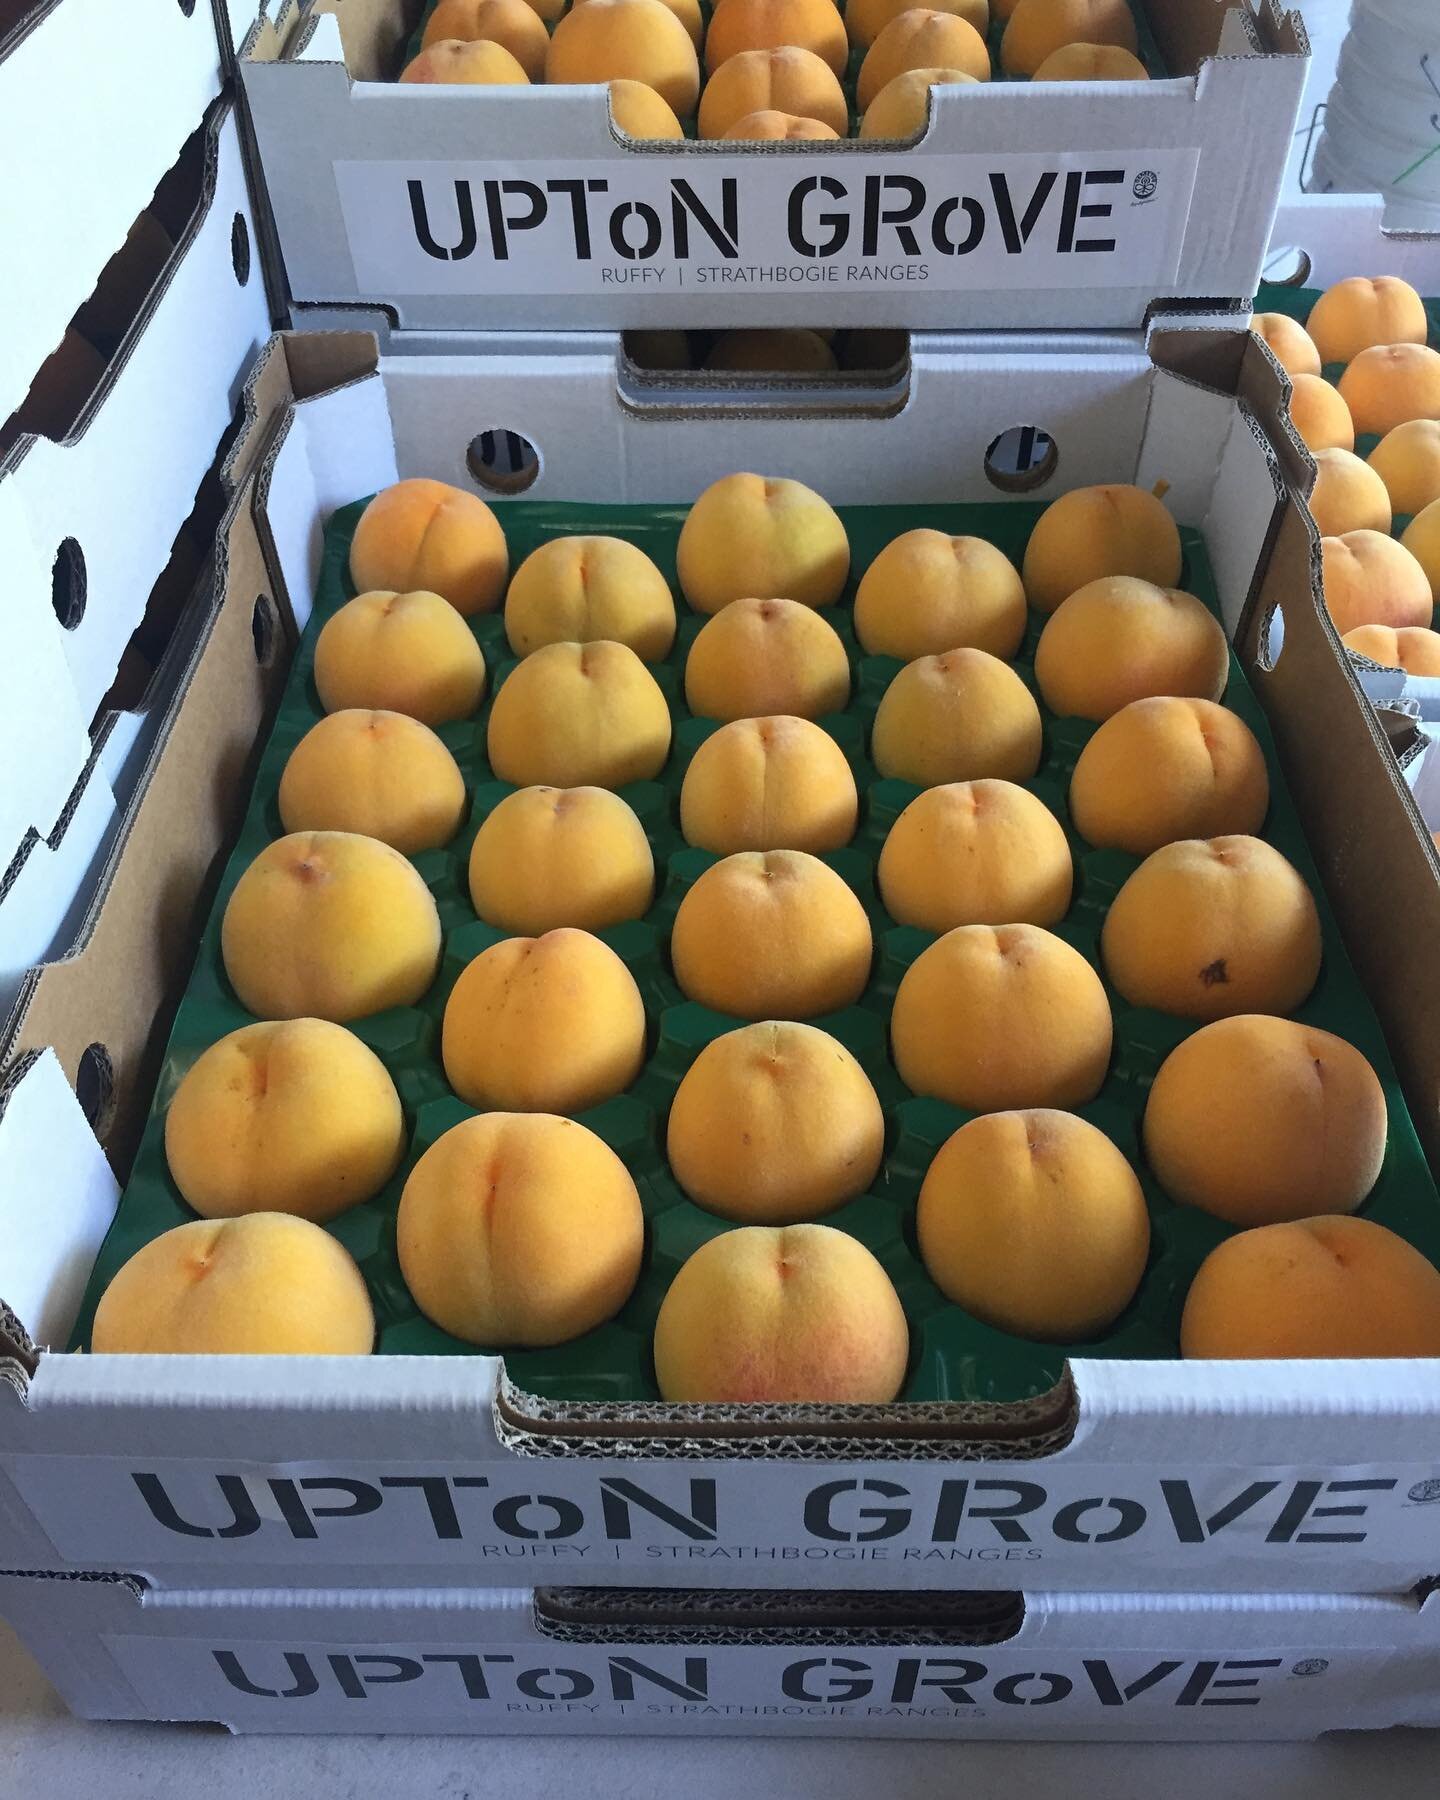 Our Demeter biodynamic certified Tatura 211 clingstone peaches are now available in organic grocers across Melbourne. It&rsquo;s a short season so be sure to ask your supplier for Upton Grove clingstone peaches now 🍑😋 #Uptongrove #uptongroveruffy #